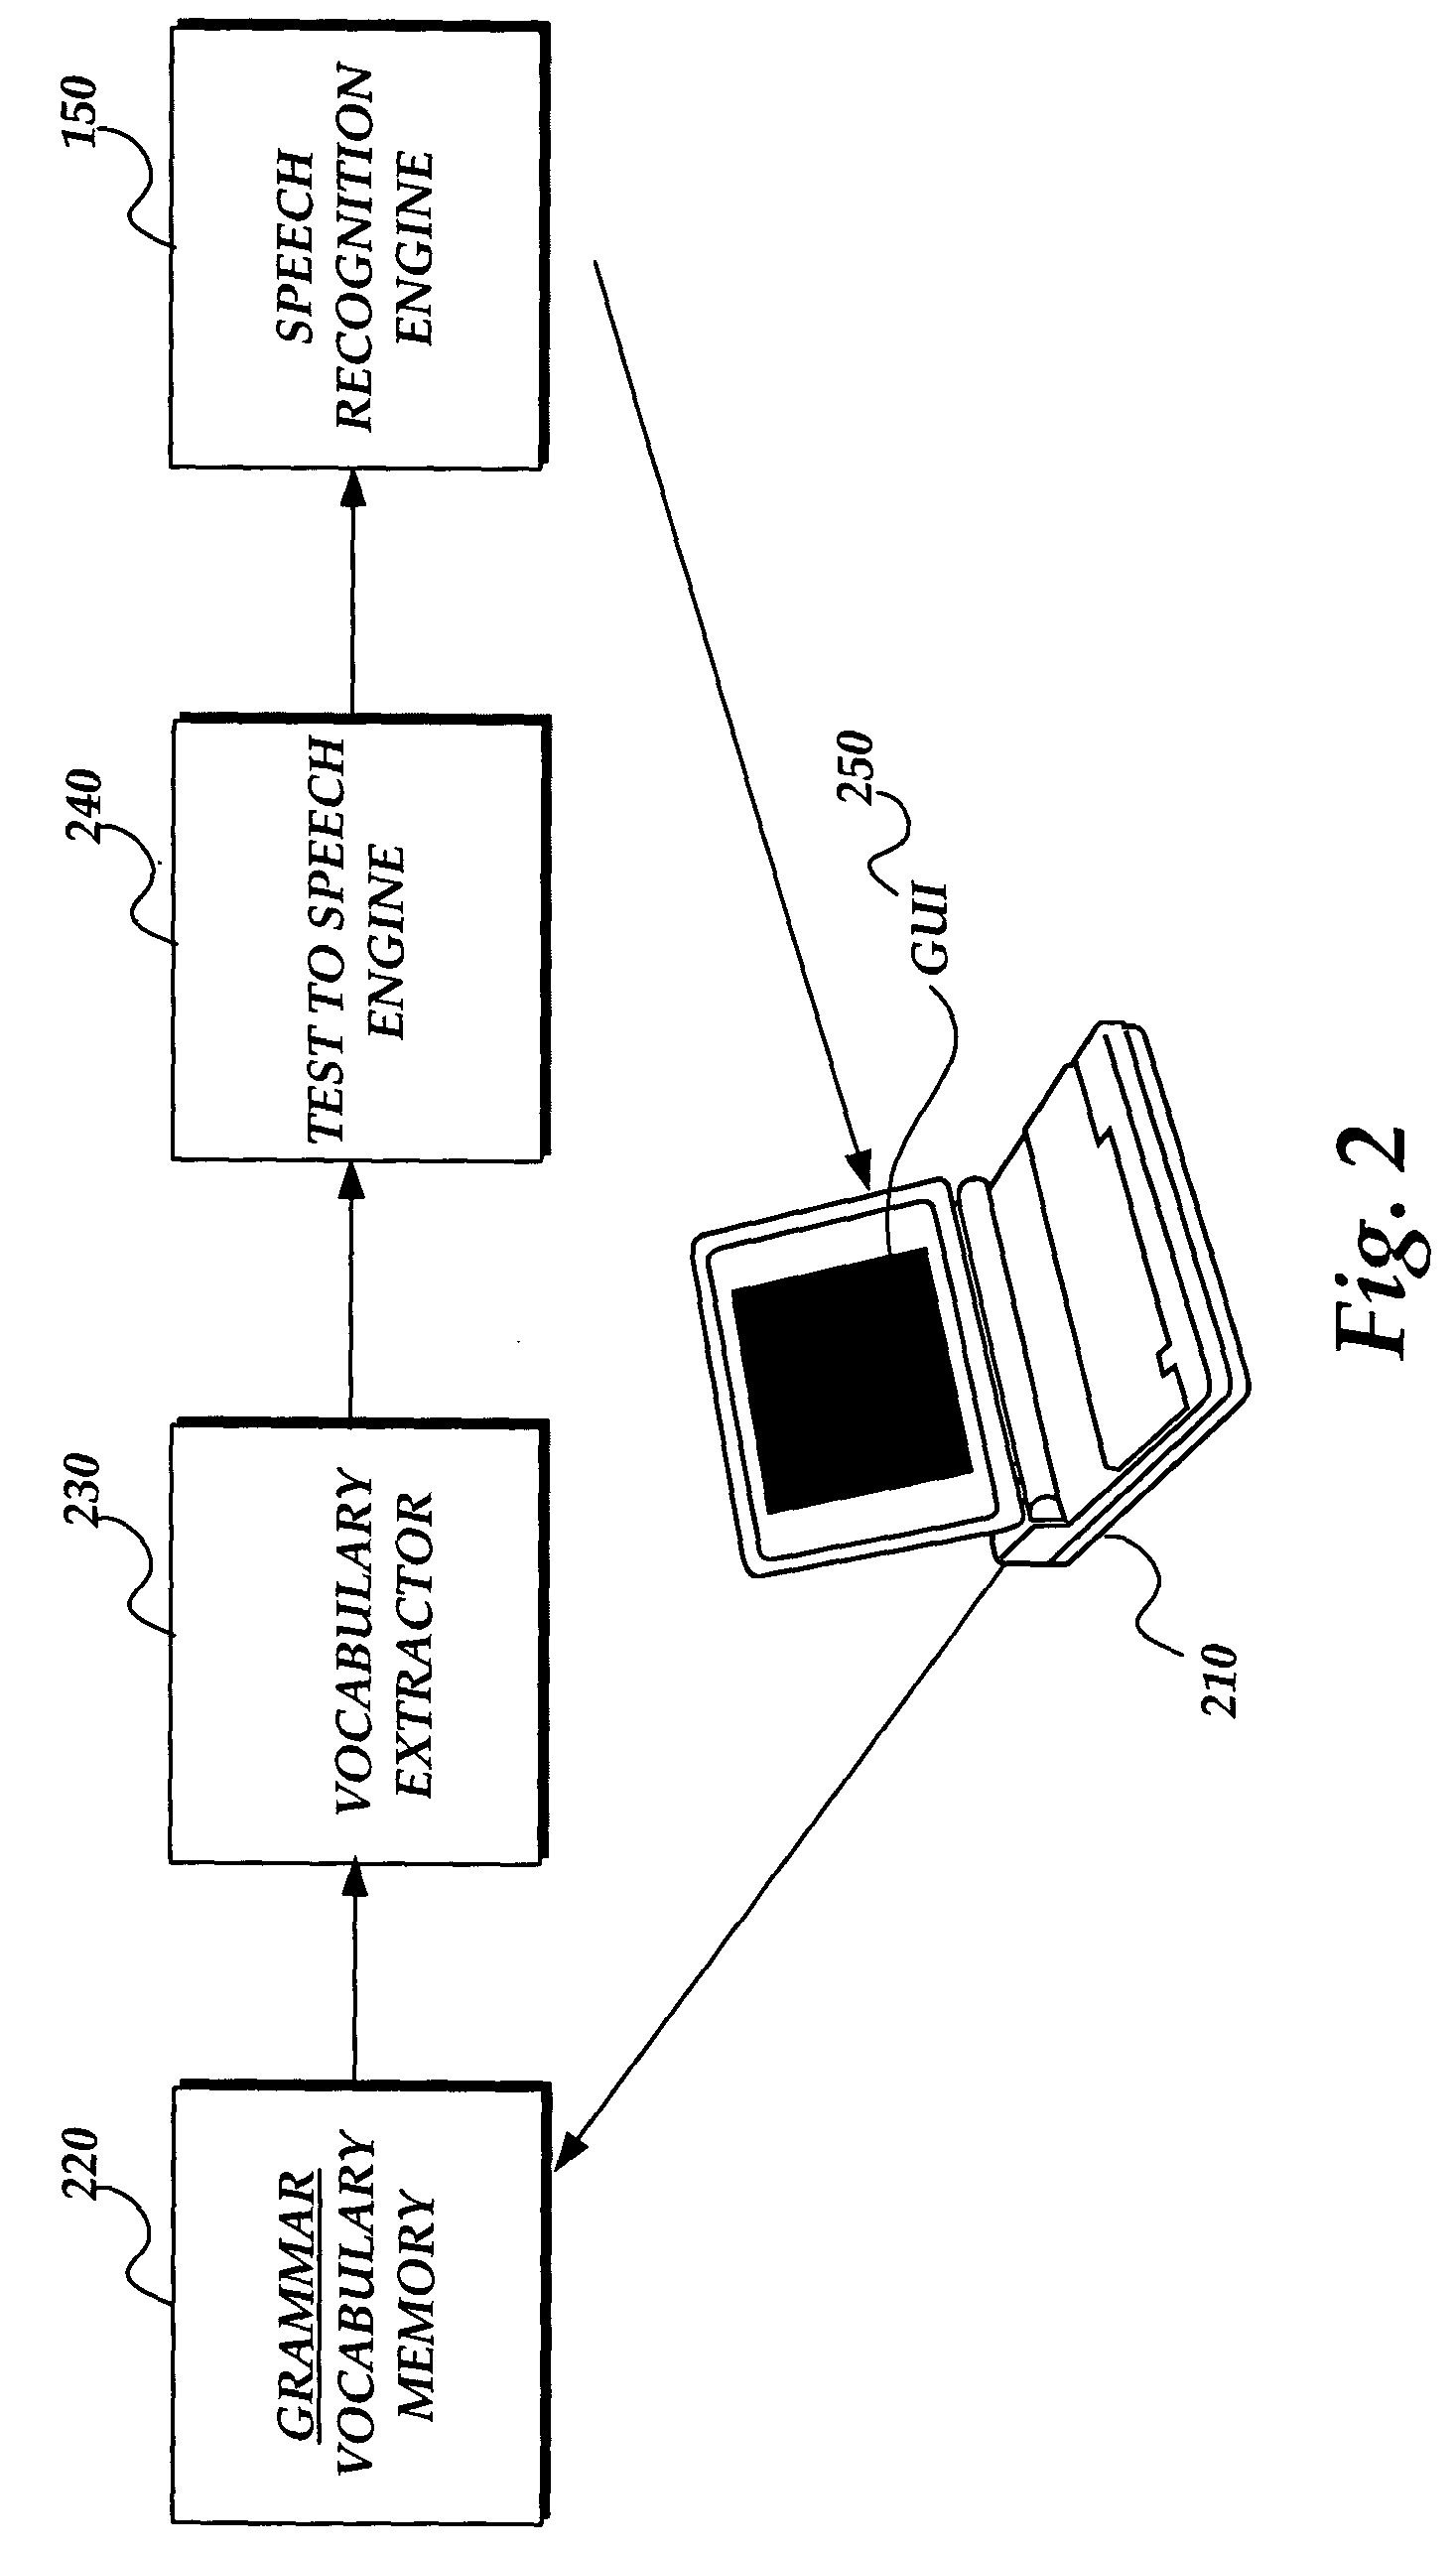 Speech recognition error identification method and system